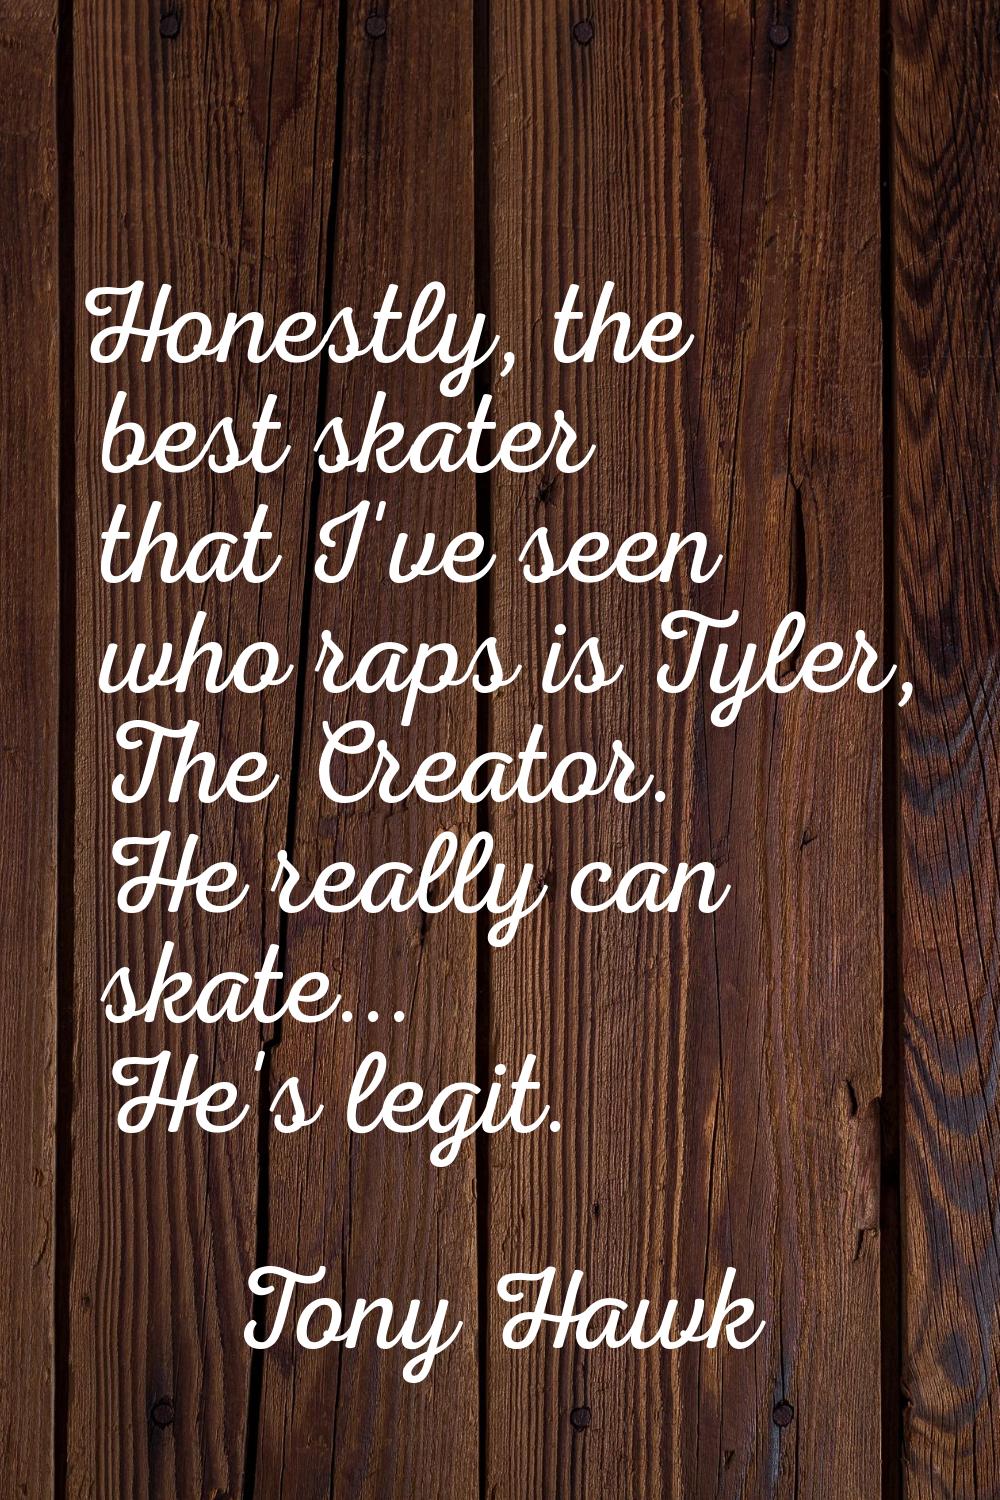 Honestly, the best skater that I've seen who raps is Tyler, The Creator. He really can skate... He'